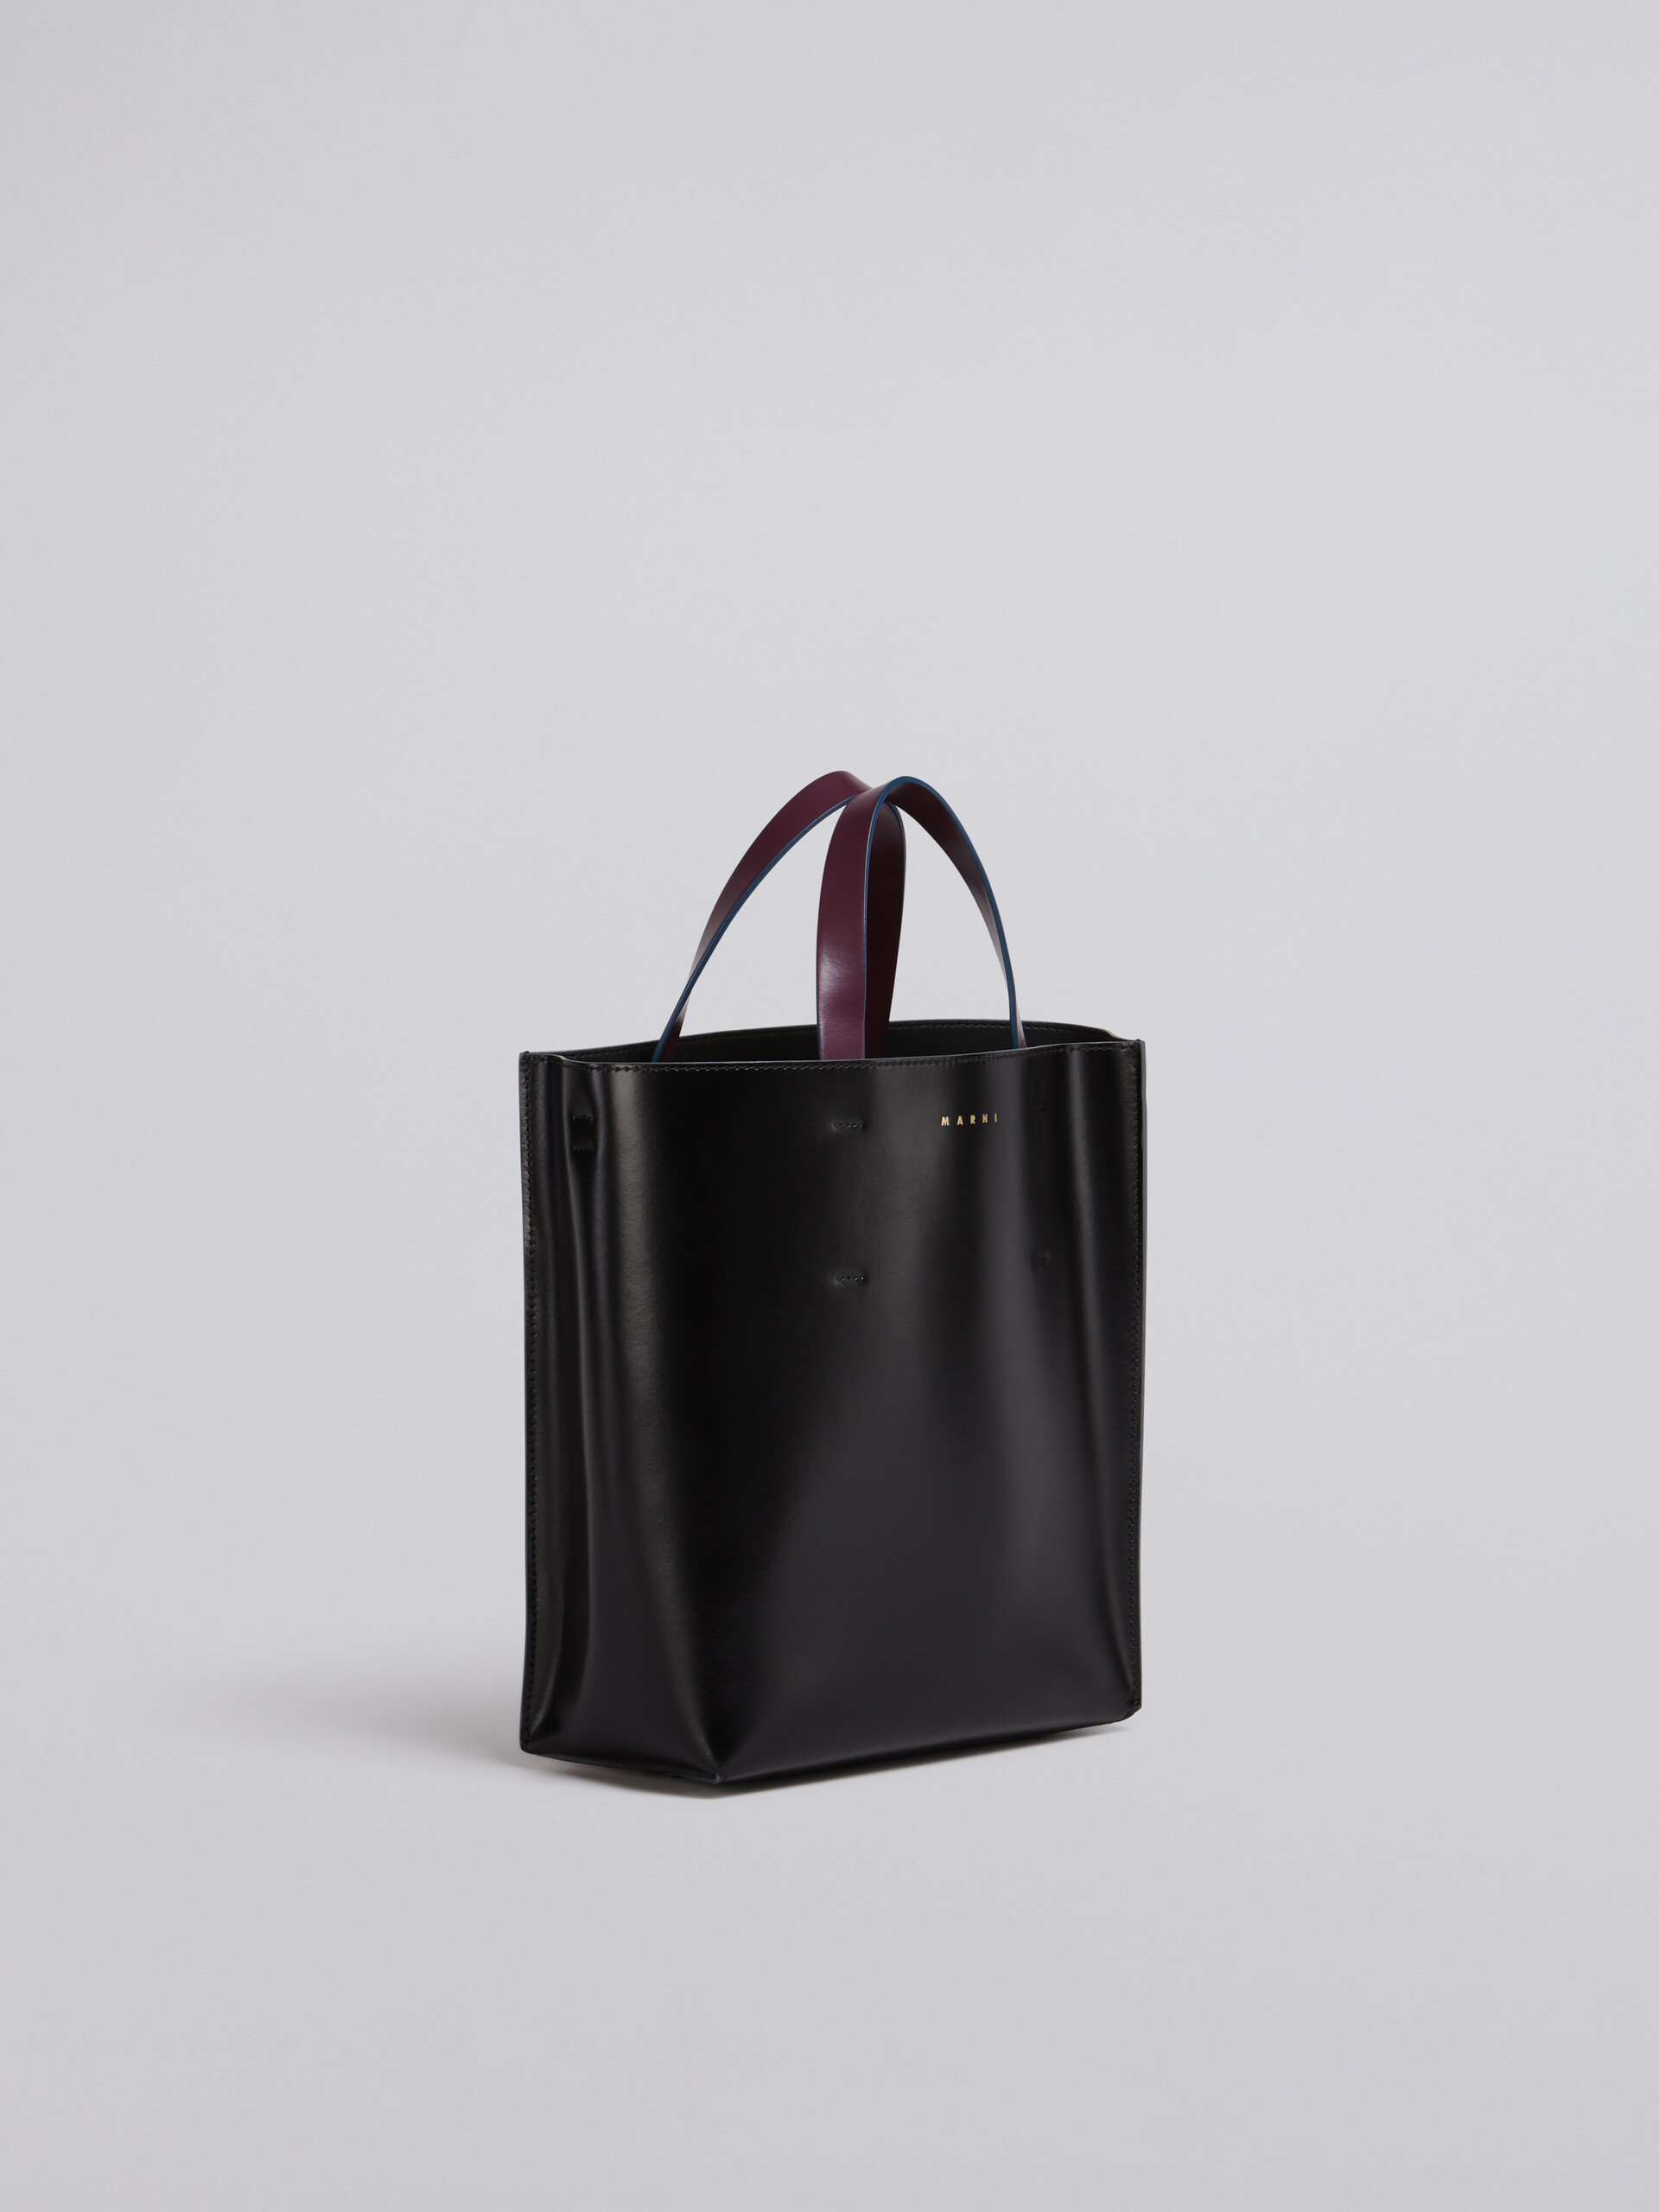 MUSEO small bag in brown and black leather - Shopping Bags - Image 6